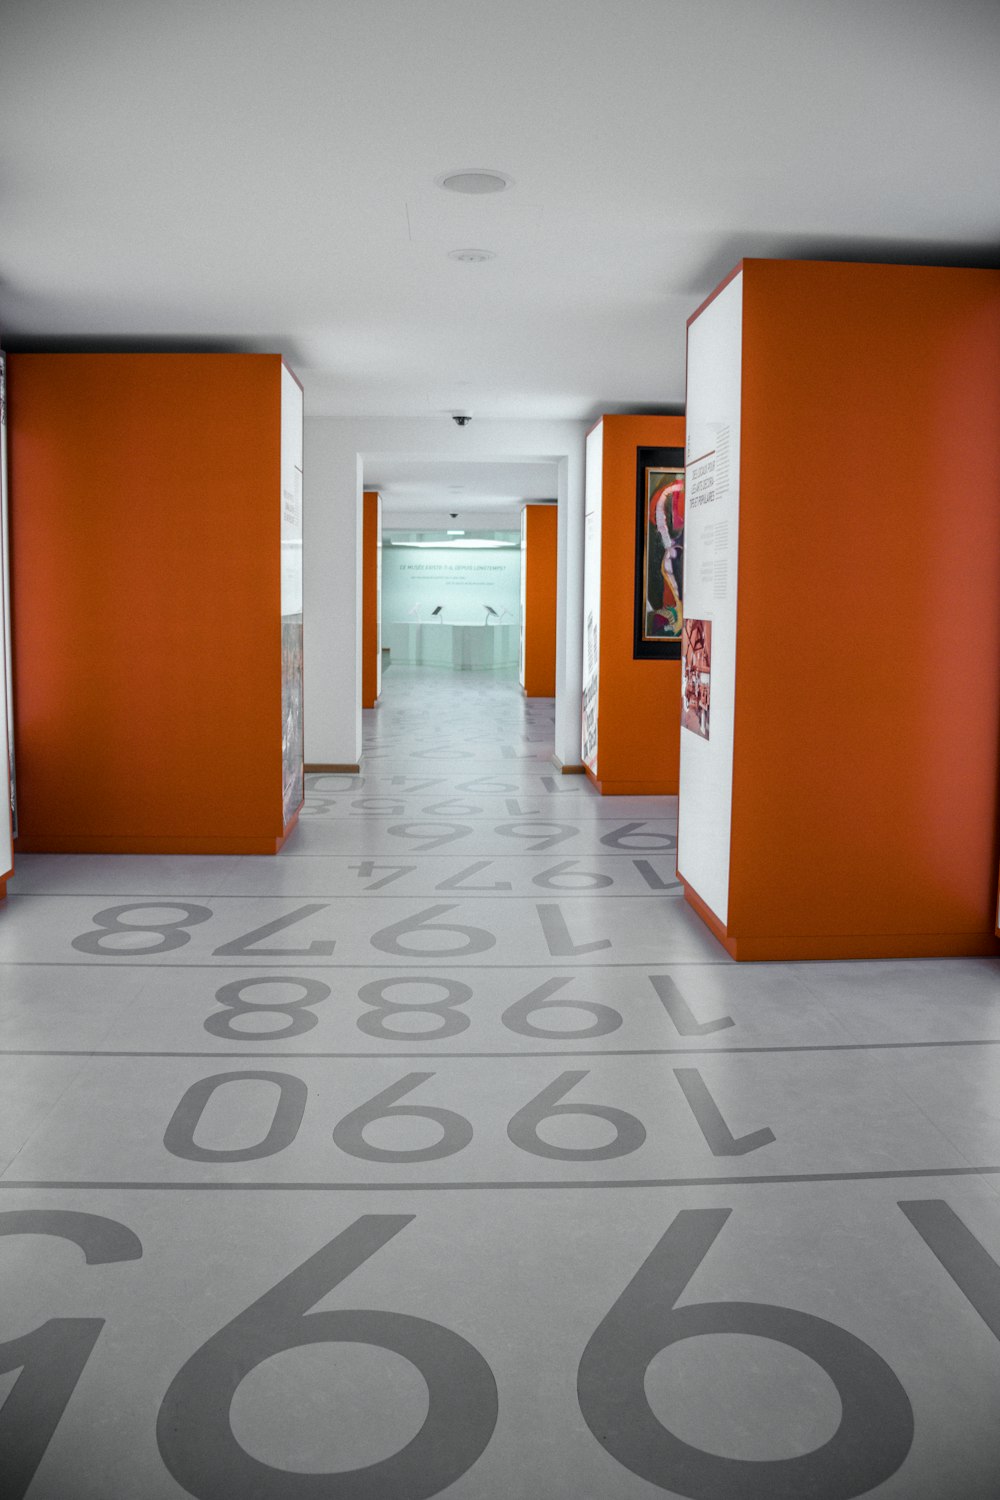 an orange and white hallway with numbers painted on the floor